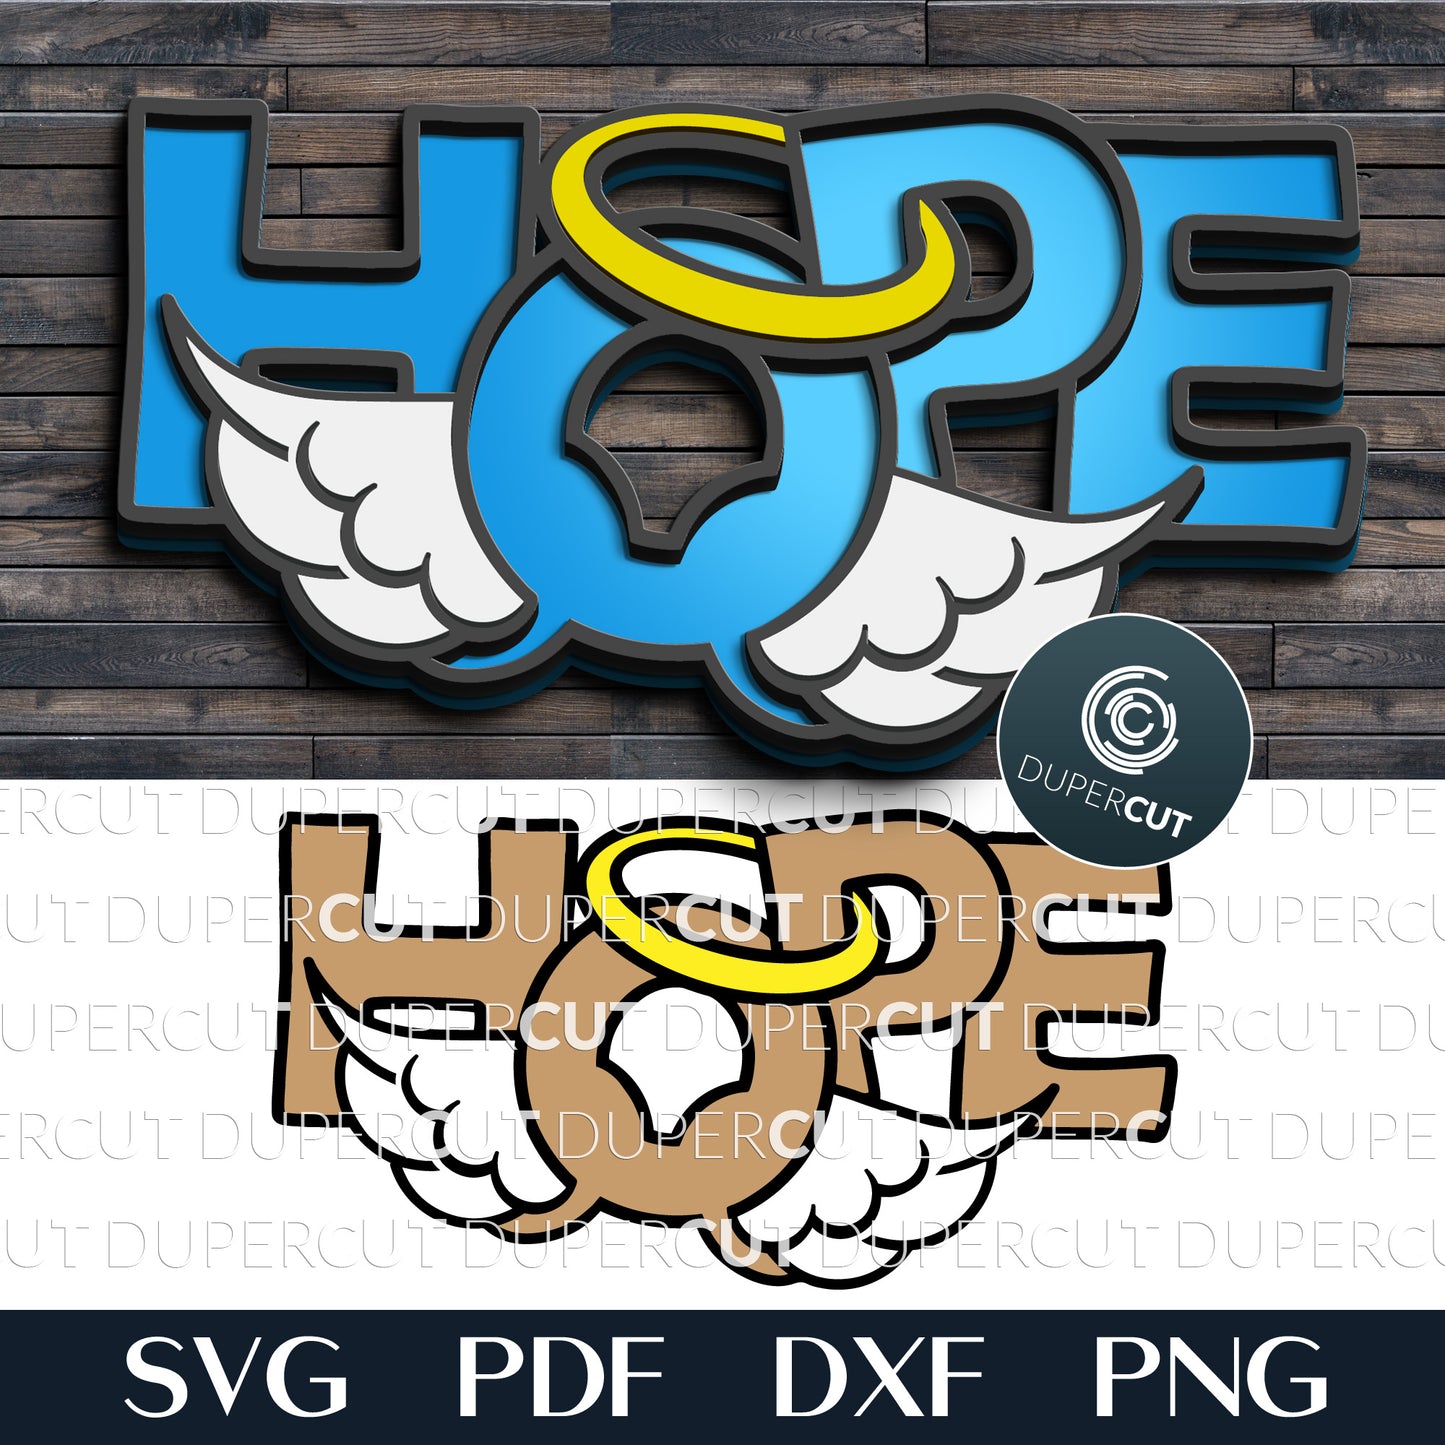 Hope with angel wings Christmas sign door hanger - SVG DXF layered cutting files for Glowforge, Cricut, scroll saw, CNC plasma machines by DuperCut.com